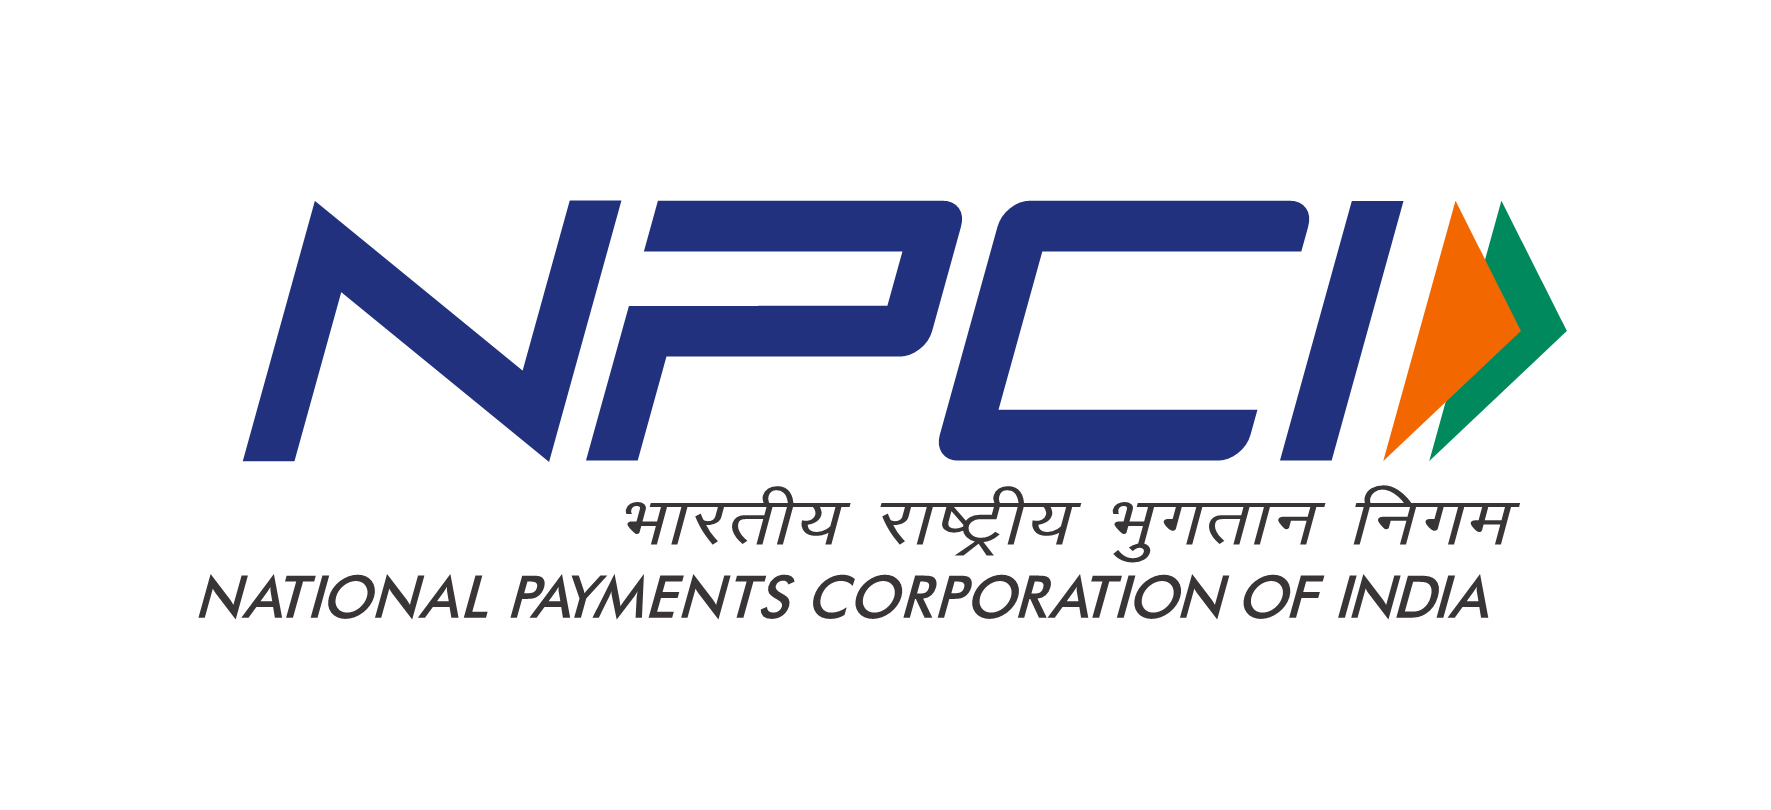 more-power-to-credit-card-customers-canara-bank-rupay-credit-cards-can-now-be-used-on-upi